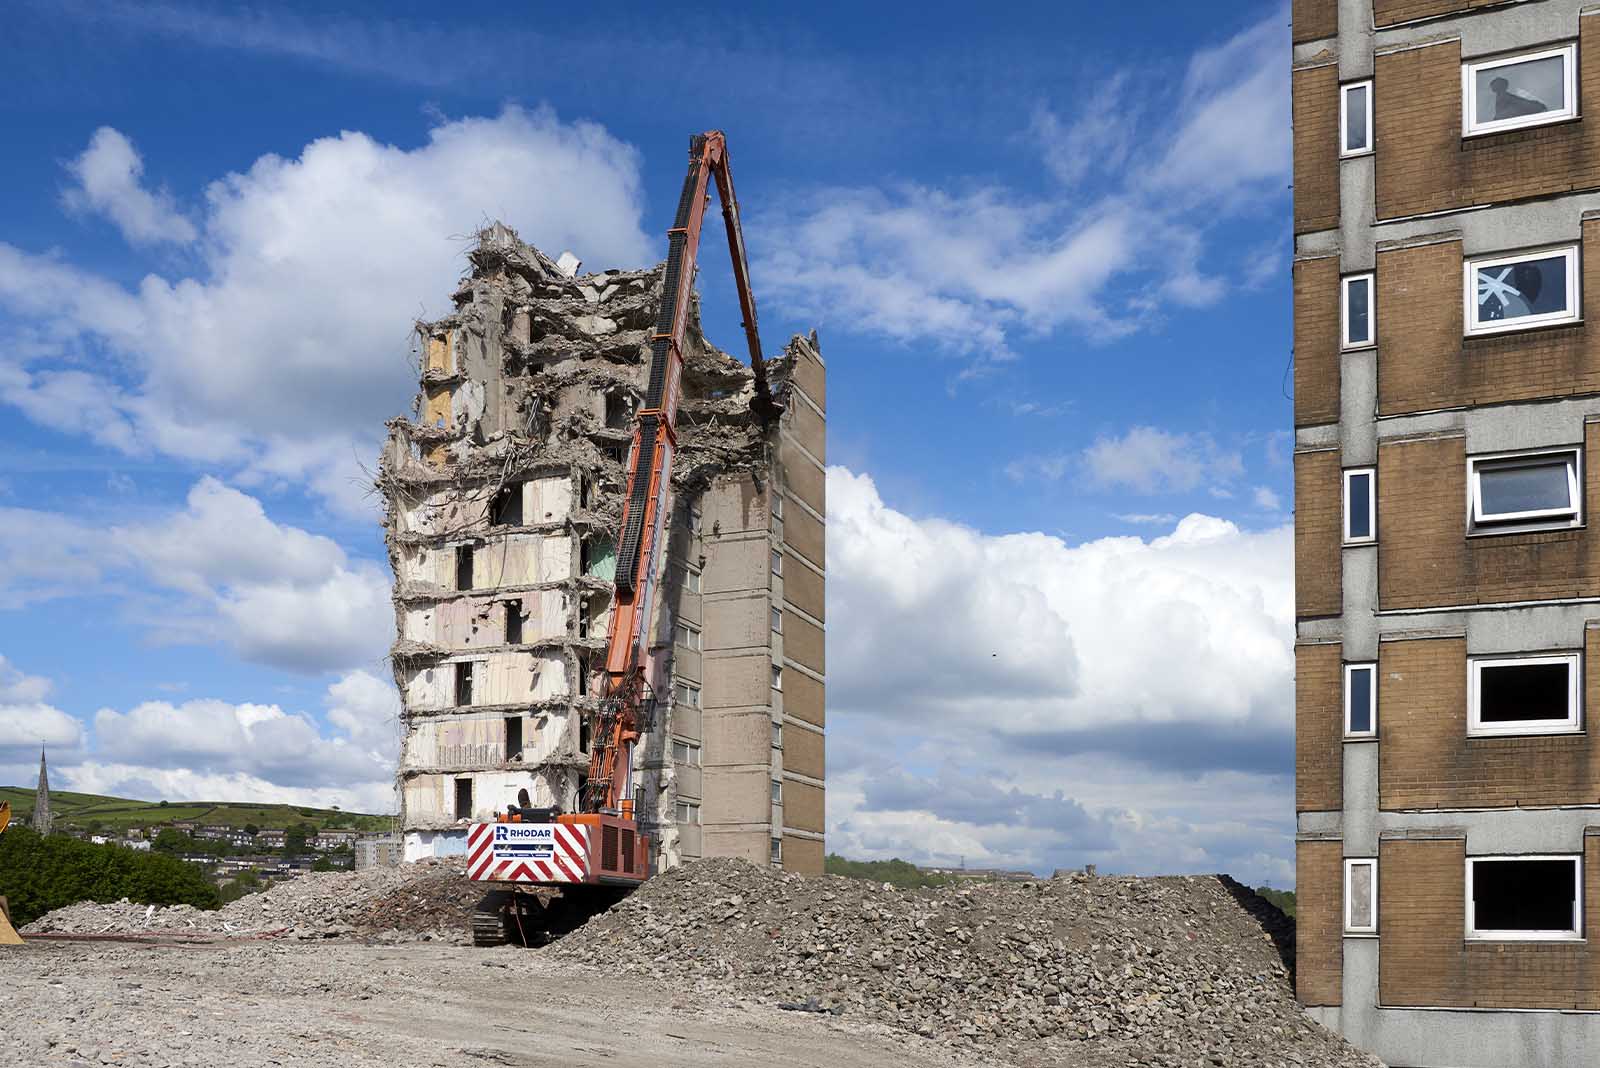 demolition of high rise block named Beech Hill in the UK